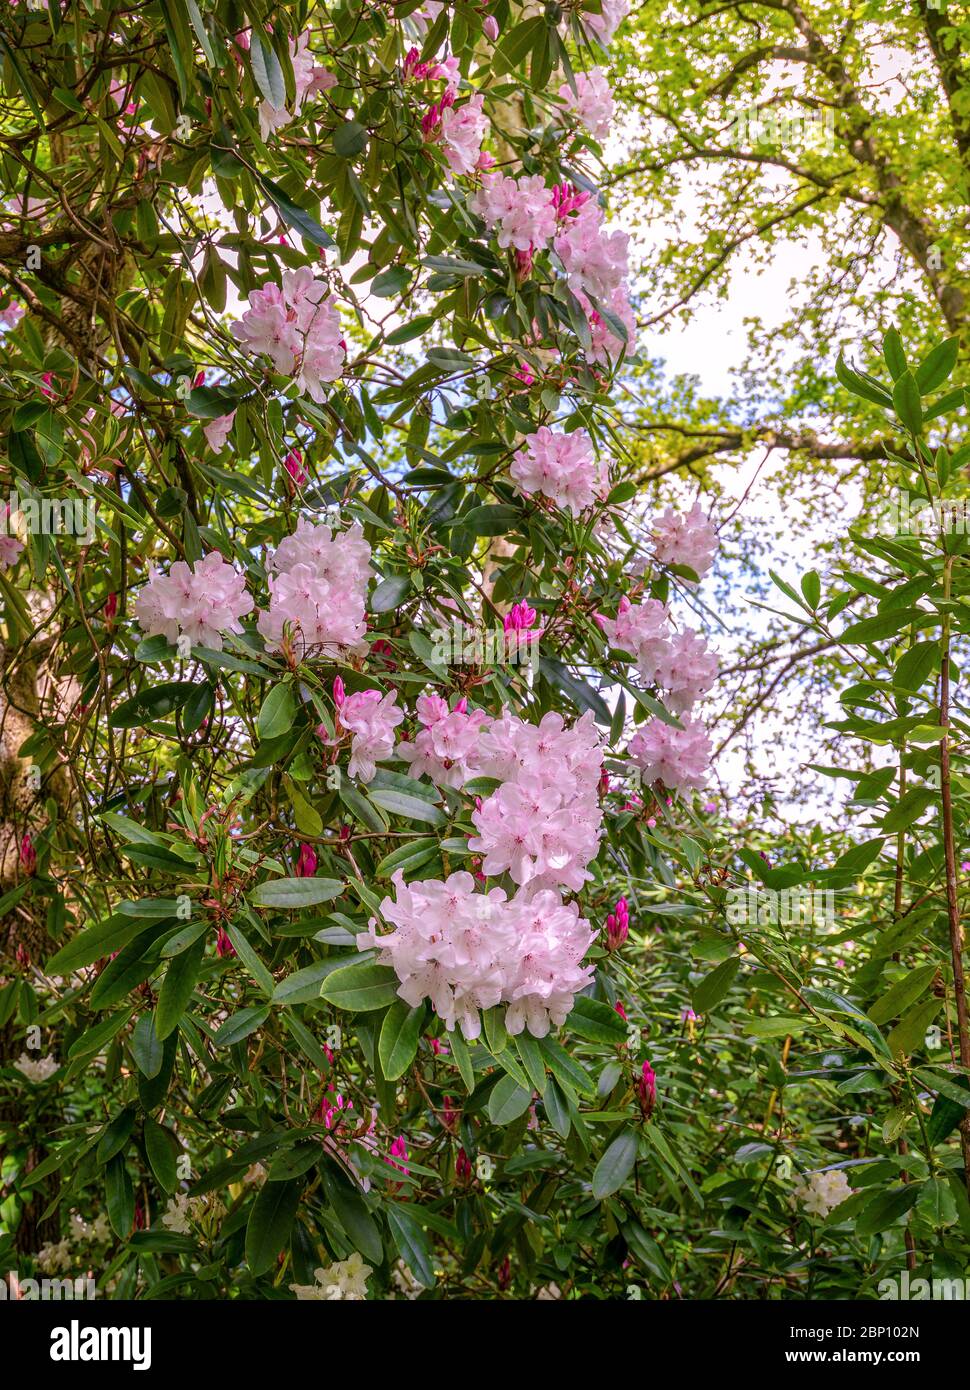 Rhododendron shrub in a woodland setting.  A shrub of pink flowers are in the foreground in between some trees. Stock Photo